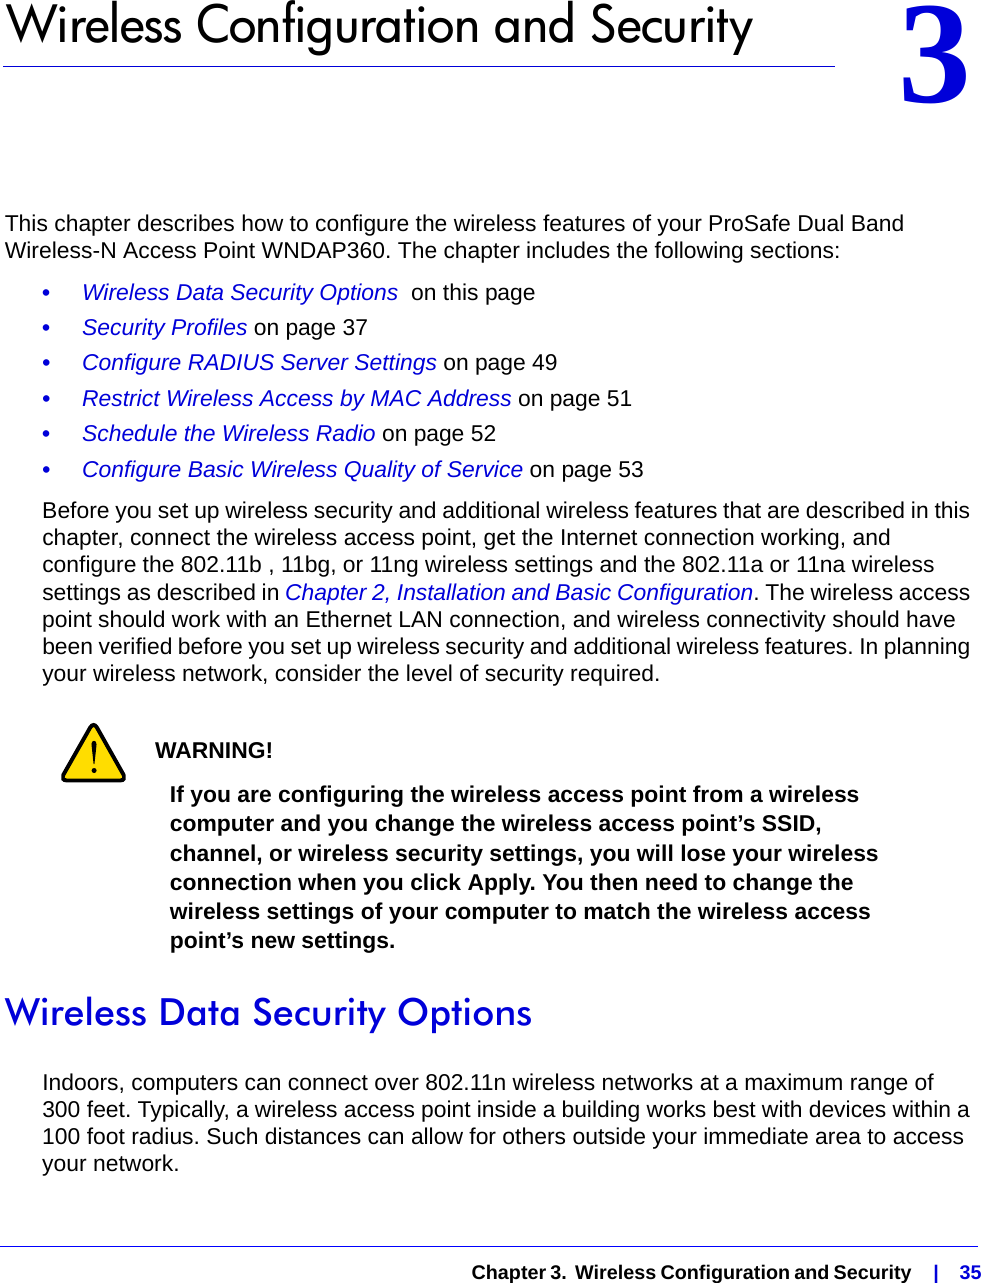   Chapter 3.  Wireless Configuration and Security    |    3533.   Wireless Configuration and SecurityThis chapter describes how to configure the wireless features of your ProSafe Dual Band Wireless-N Access Point WNDAP360. The chapter includes the following sections:•     Wireless Data Security Options  on this page•     Security Profiles on page 37•     Configure RADIUS Server Settings on page 49•     Restrict Wireless Access by MAC Address on page 51•     Schedule the Wireless Radio on page 52•     Configure Basic Wireless Quality of Service on page 53Before you set up wireless security and additional wireless features that are described in this chapter, connect the wireless access point, get the Internet connection working, and configure the 802.11b , 11bg, or 11ng wireless settings and the 802.11a or 11na wireless settings as described in Chapter 2, Installation and Basic Configuration. The wireless access point should work with an Ethernet LAN connection, and wireless connectivity should have been verified before you set up wireless security and additional wireless features. In planning your wireless network, consider the level of security required.WARNING!If you are configuring the wireless access point from a wireless computer and you change the wireless access point’s SSID, channel, or wireless security settings, you will lose your wireless connection when you click Apply. You then need to change the wireless settings of your computer to match the wireless access point’s new settings.Wireless Data Security OptionsIndoors, computers can connect over 802.11n wireless networks at a maximum range of 300 feet. Typically, a wireless access point inside a building works best with devices within a 100 foot radius. Such distances can allow for others outside your immediate area to access your network.